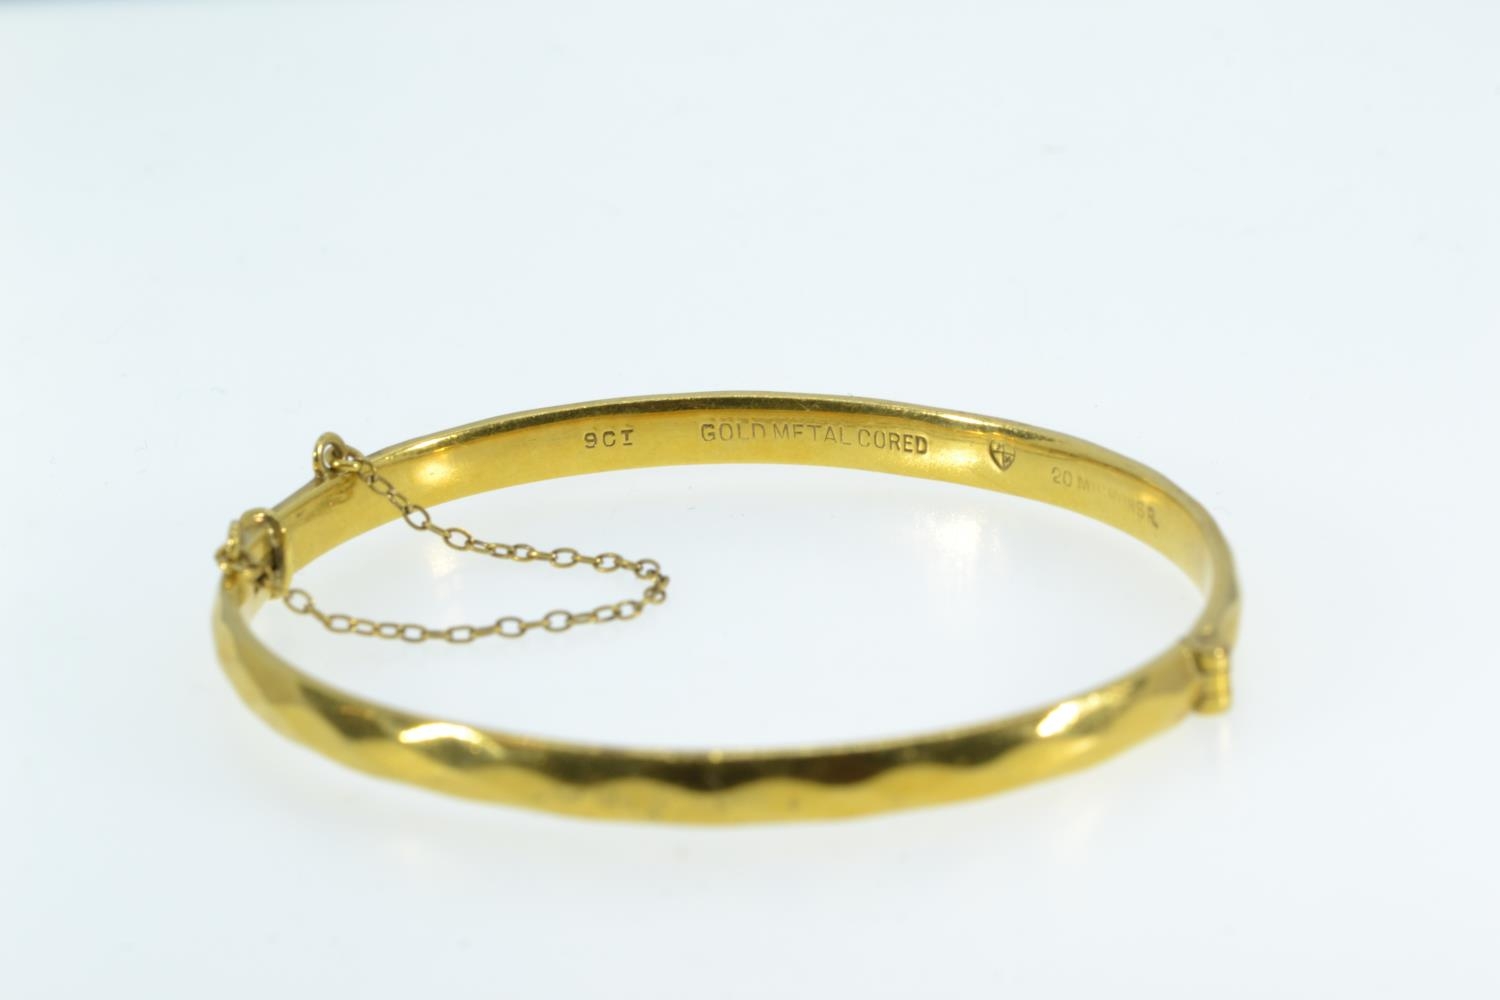 9ct gold metal cored hinged bracelet, inner width 59mm, gross weight 13.3 grams  - Image 4 of 4